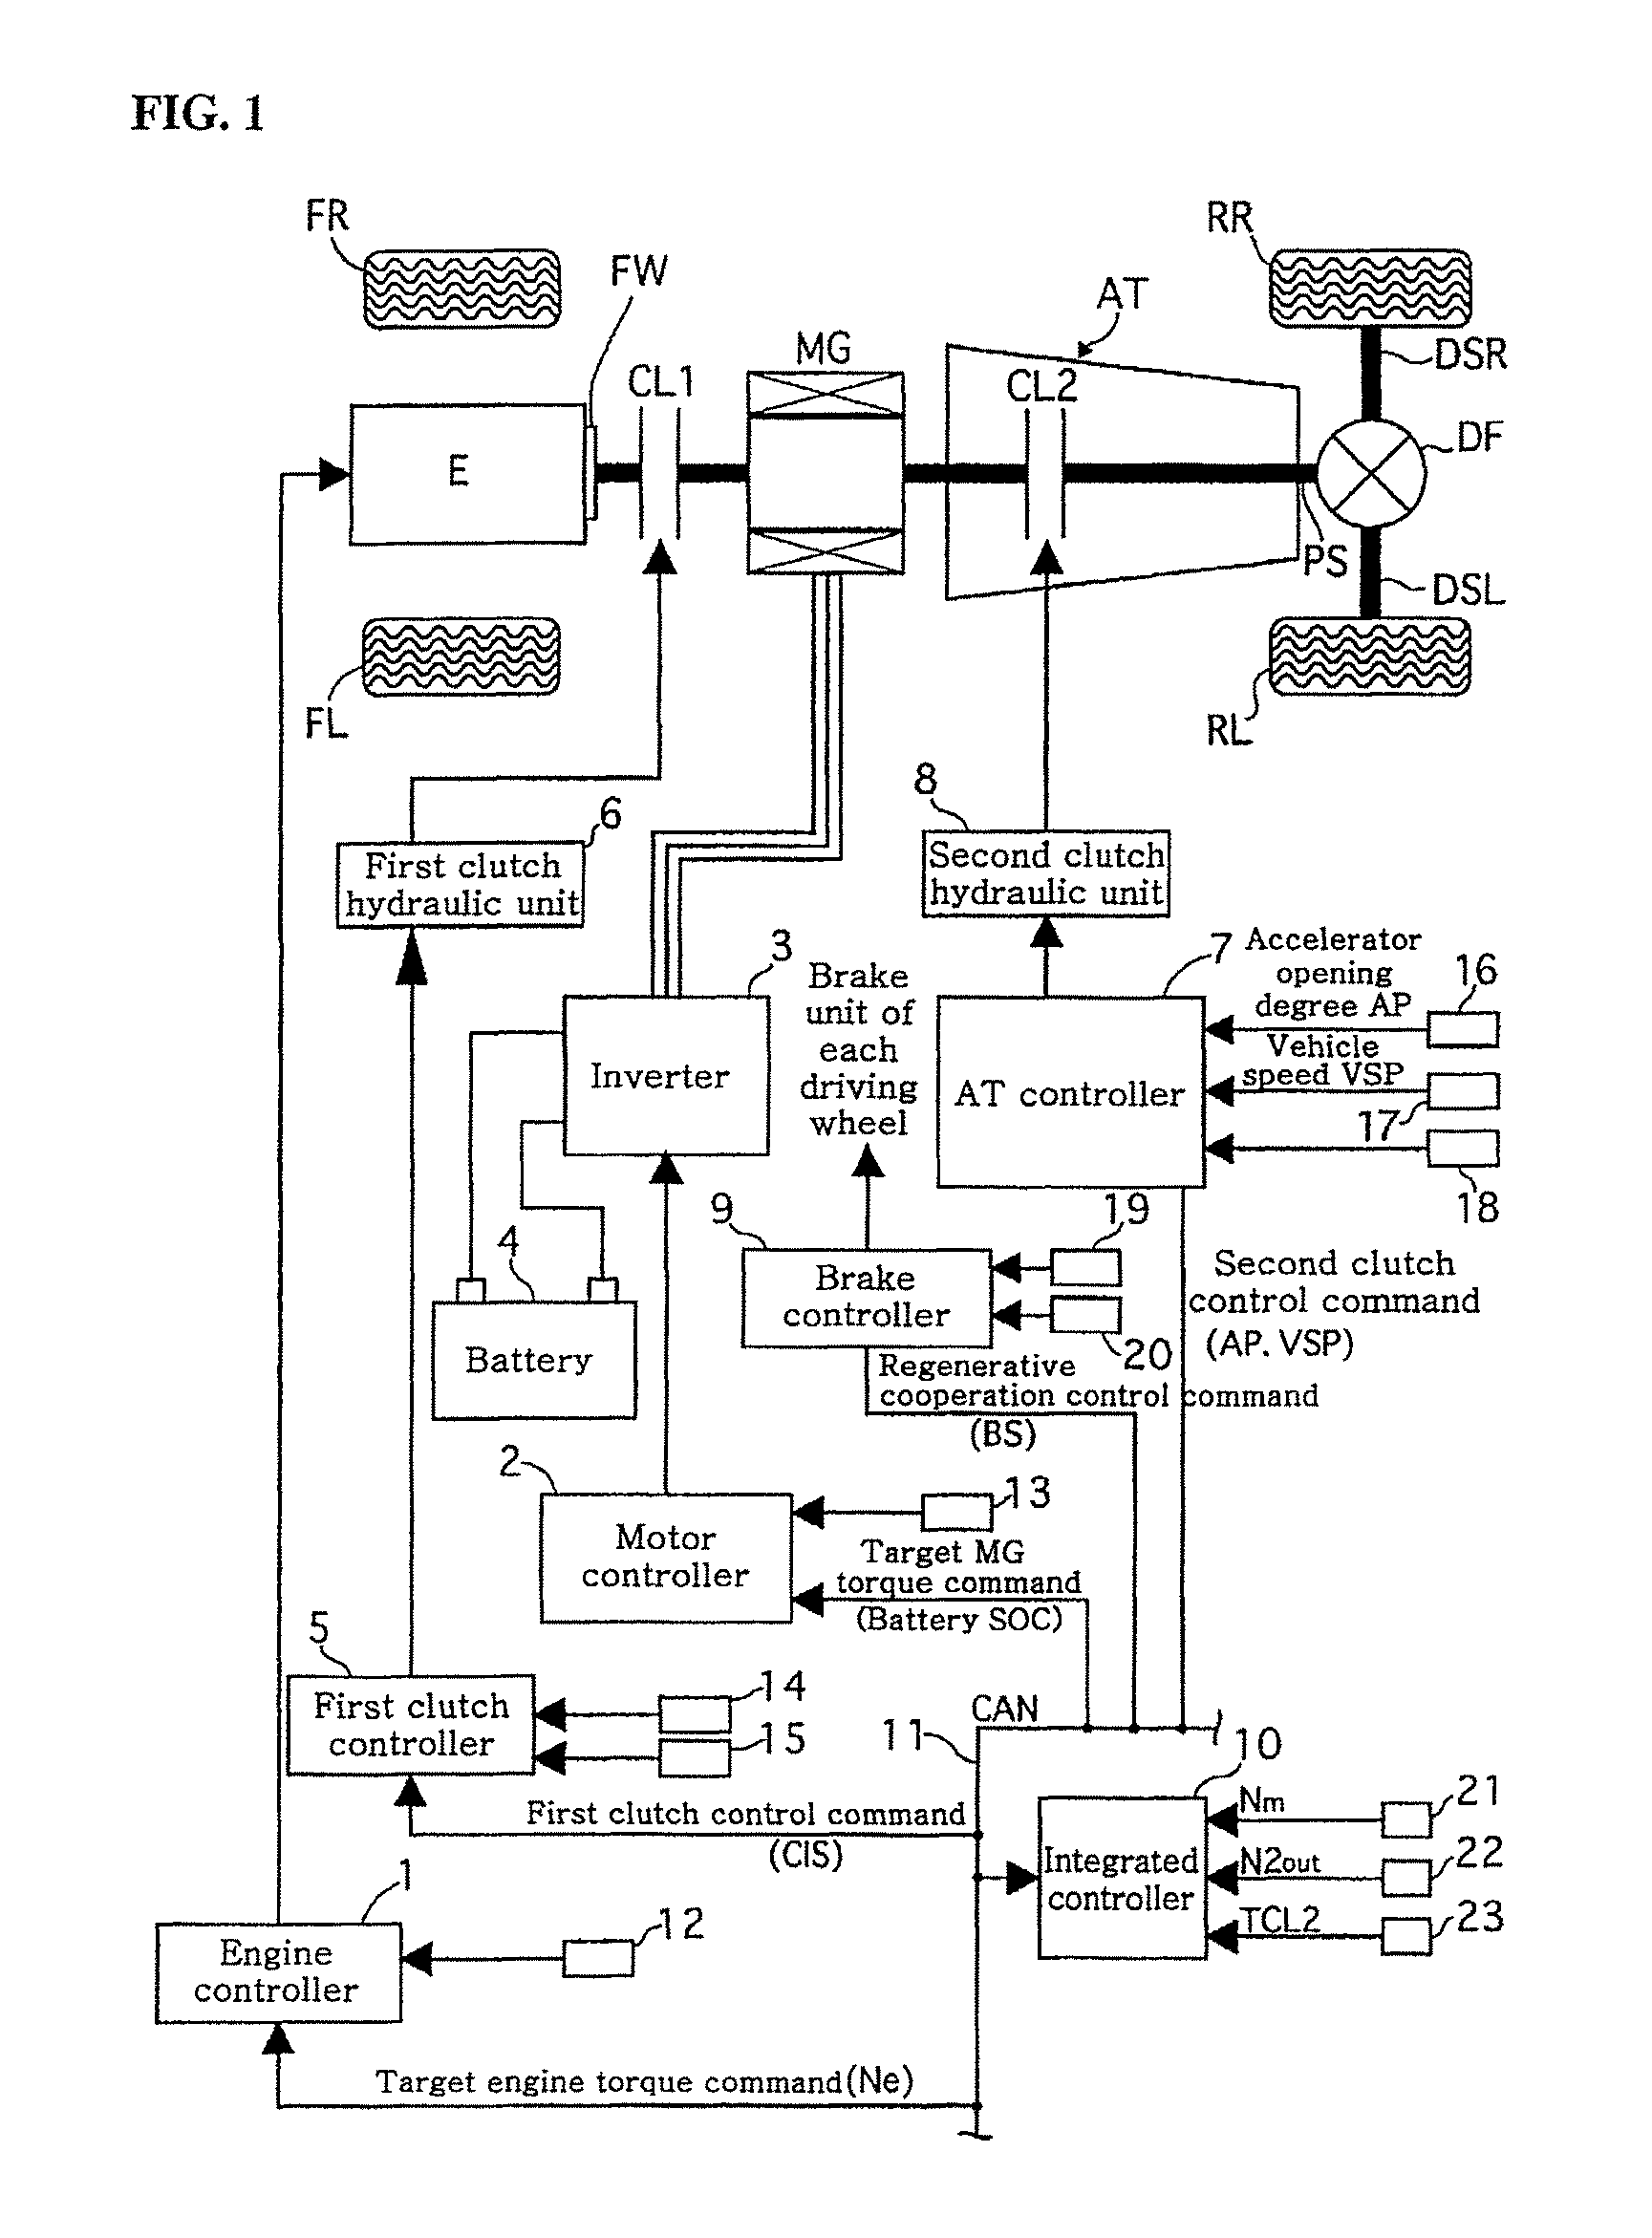 Control unit for controlling an engine stop of a hybrid vehicle